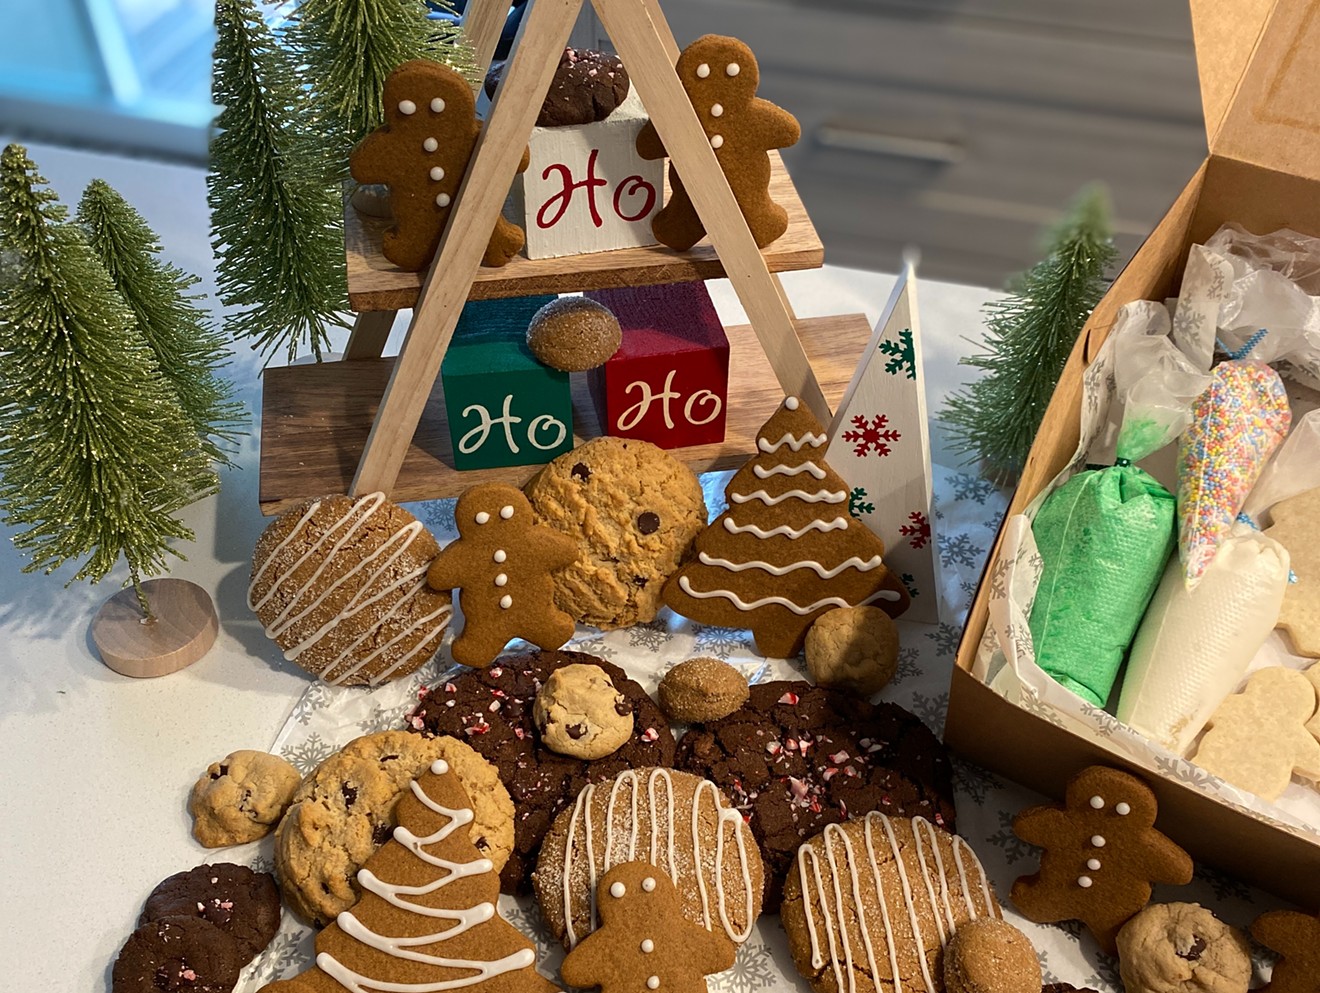 Bakers like YUM Allergy Friendly Bakery are offering a selection of cookies and other confections for all your holiday gatherings.